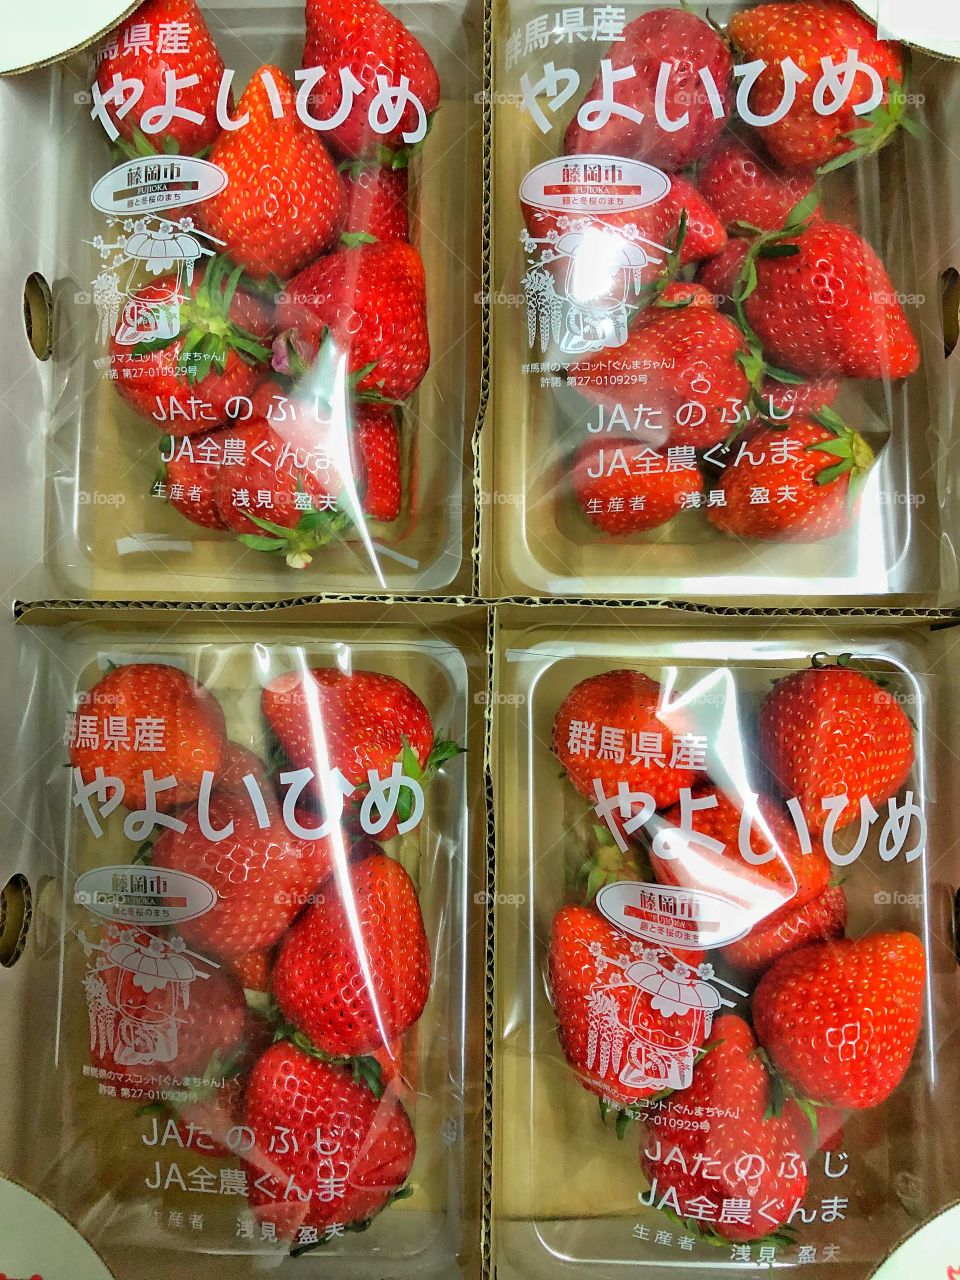 Punnets of Perfect Japanese greenhouse grown strawberries